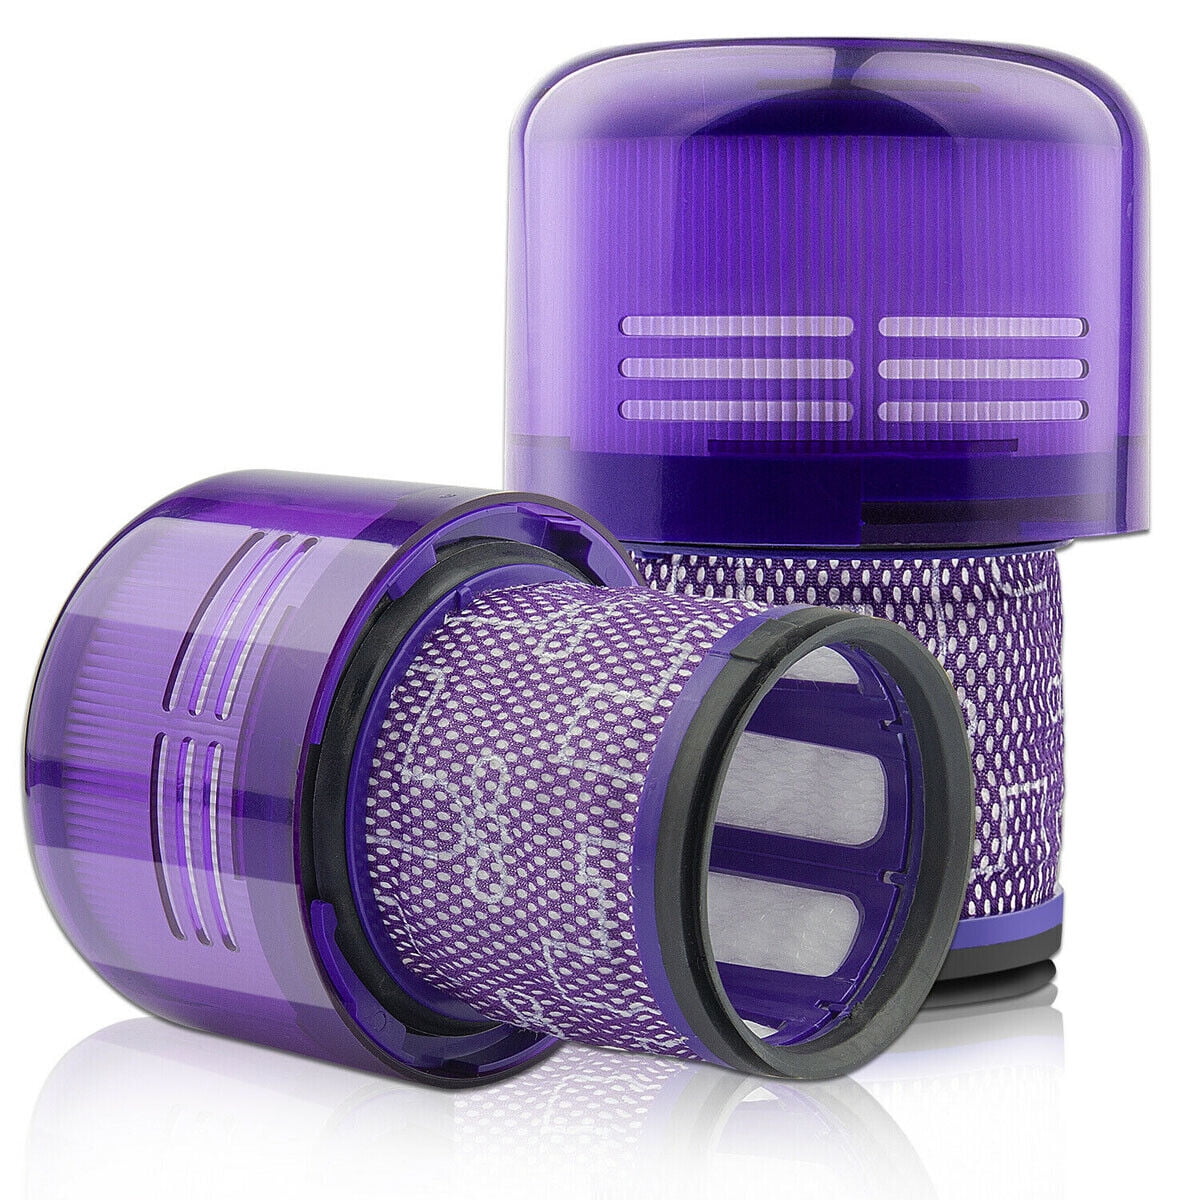 How to Replace Dyson V15 Vacuum Filter, Replacement & Maintenance Tips